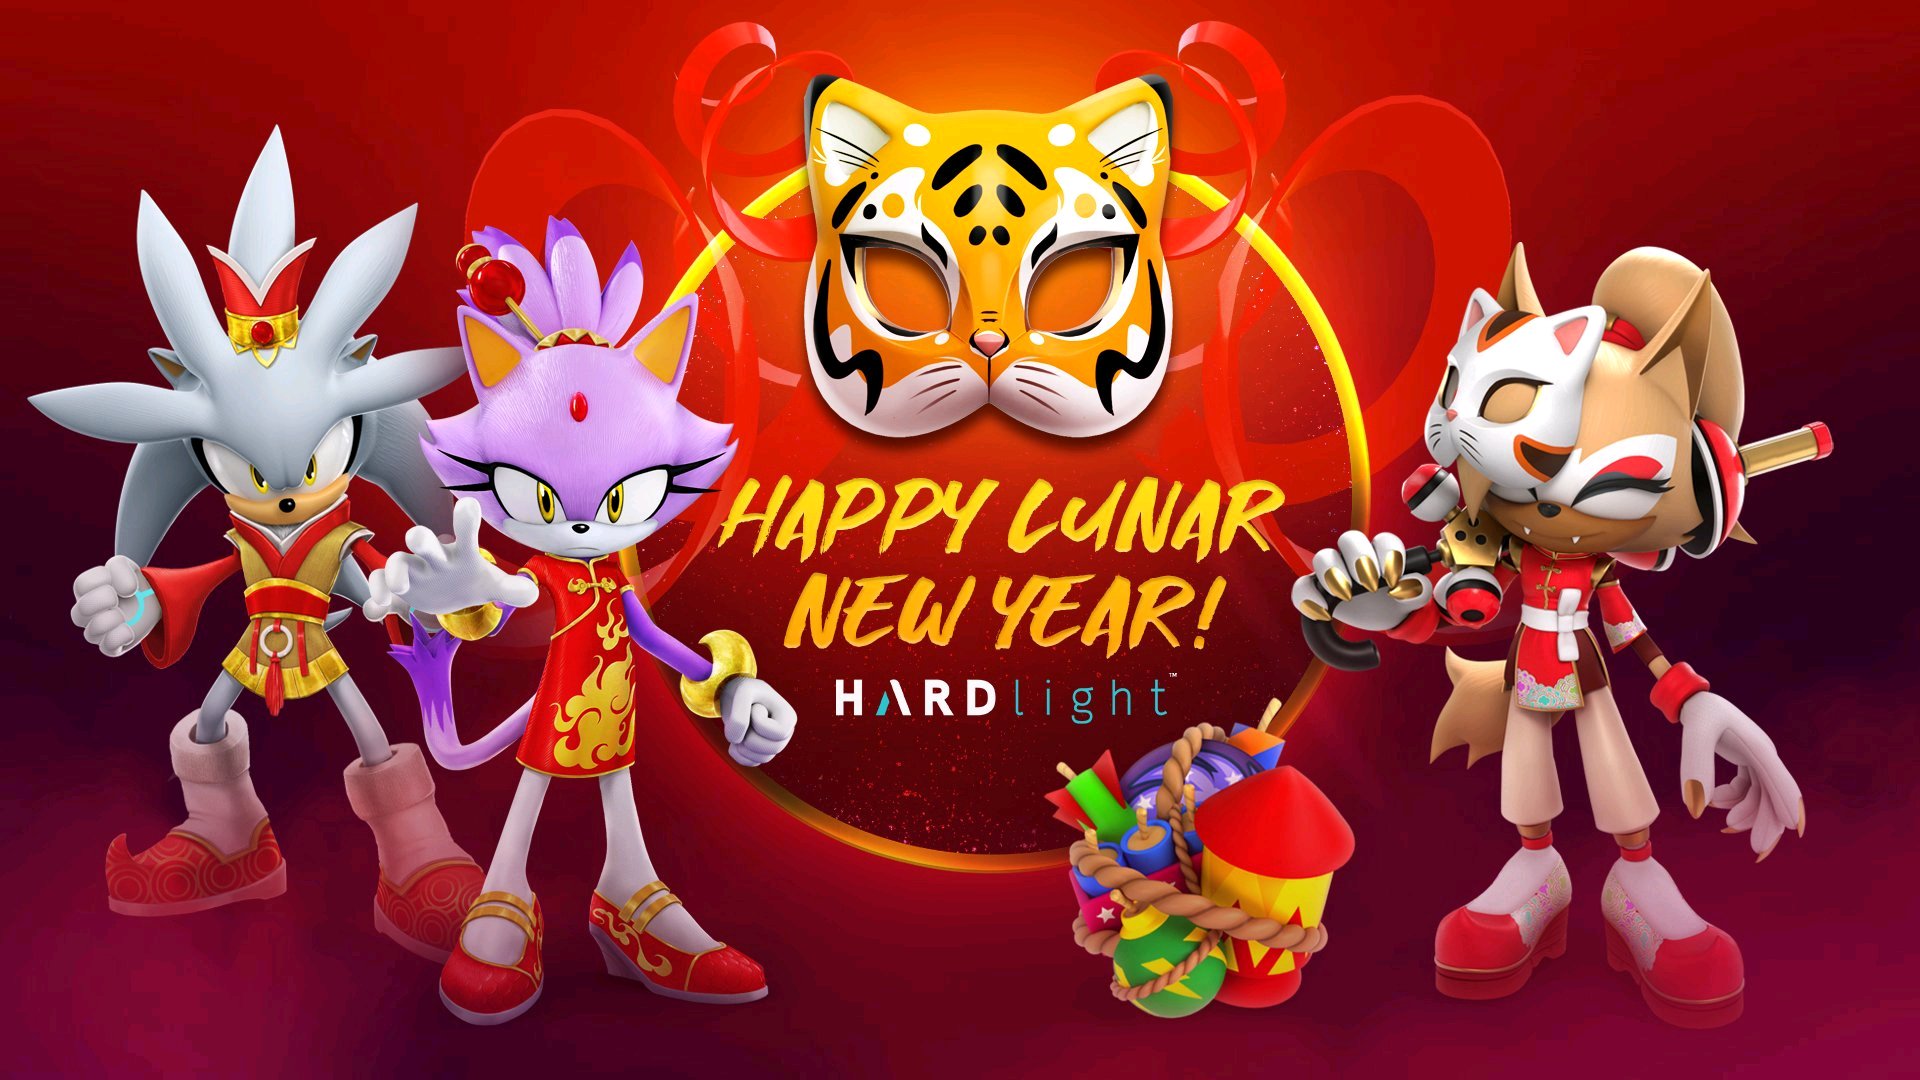 General 1920x1080 Sonic sonic forces Sonic the Hedgehog Sega New Year video games red background mask Spring Festival PC gaming holiday hedgehog cats wolf Blaze the Cat Whisper Mobile Game white pantyhose Silver the Hedgehog hanfu logo sniper rifle gun